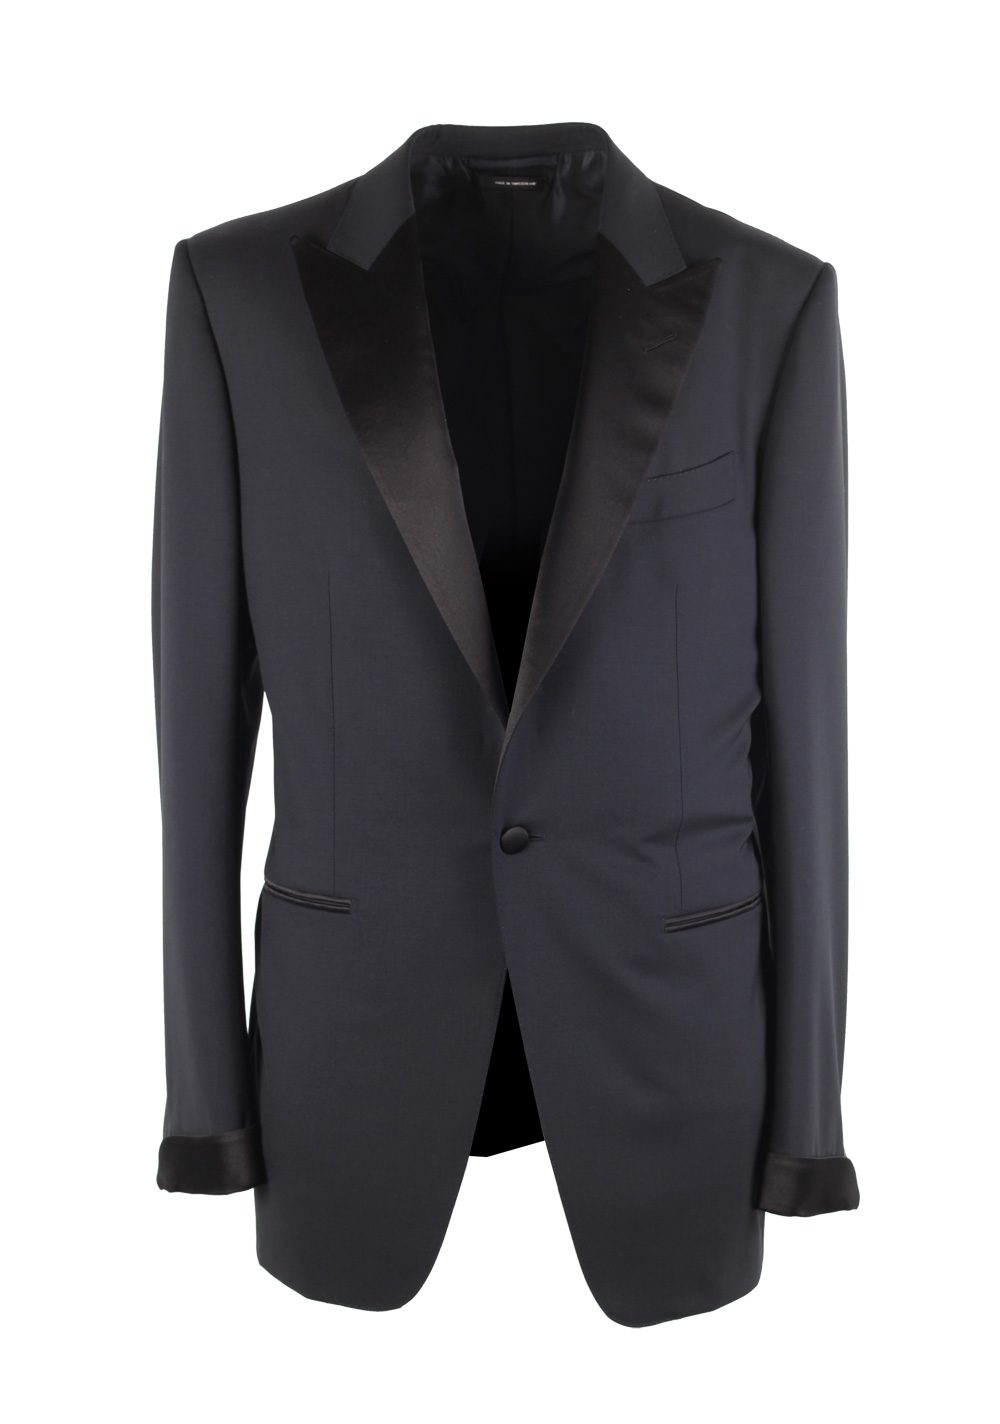 TOM FORD O'Connor Midnight Blue Tuxedo Smoking Suit Size 50L / 40L U.S ...